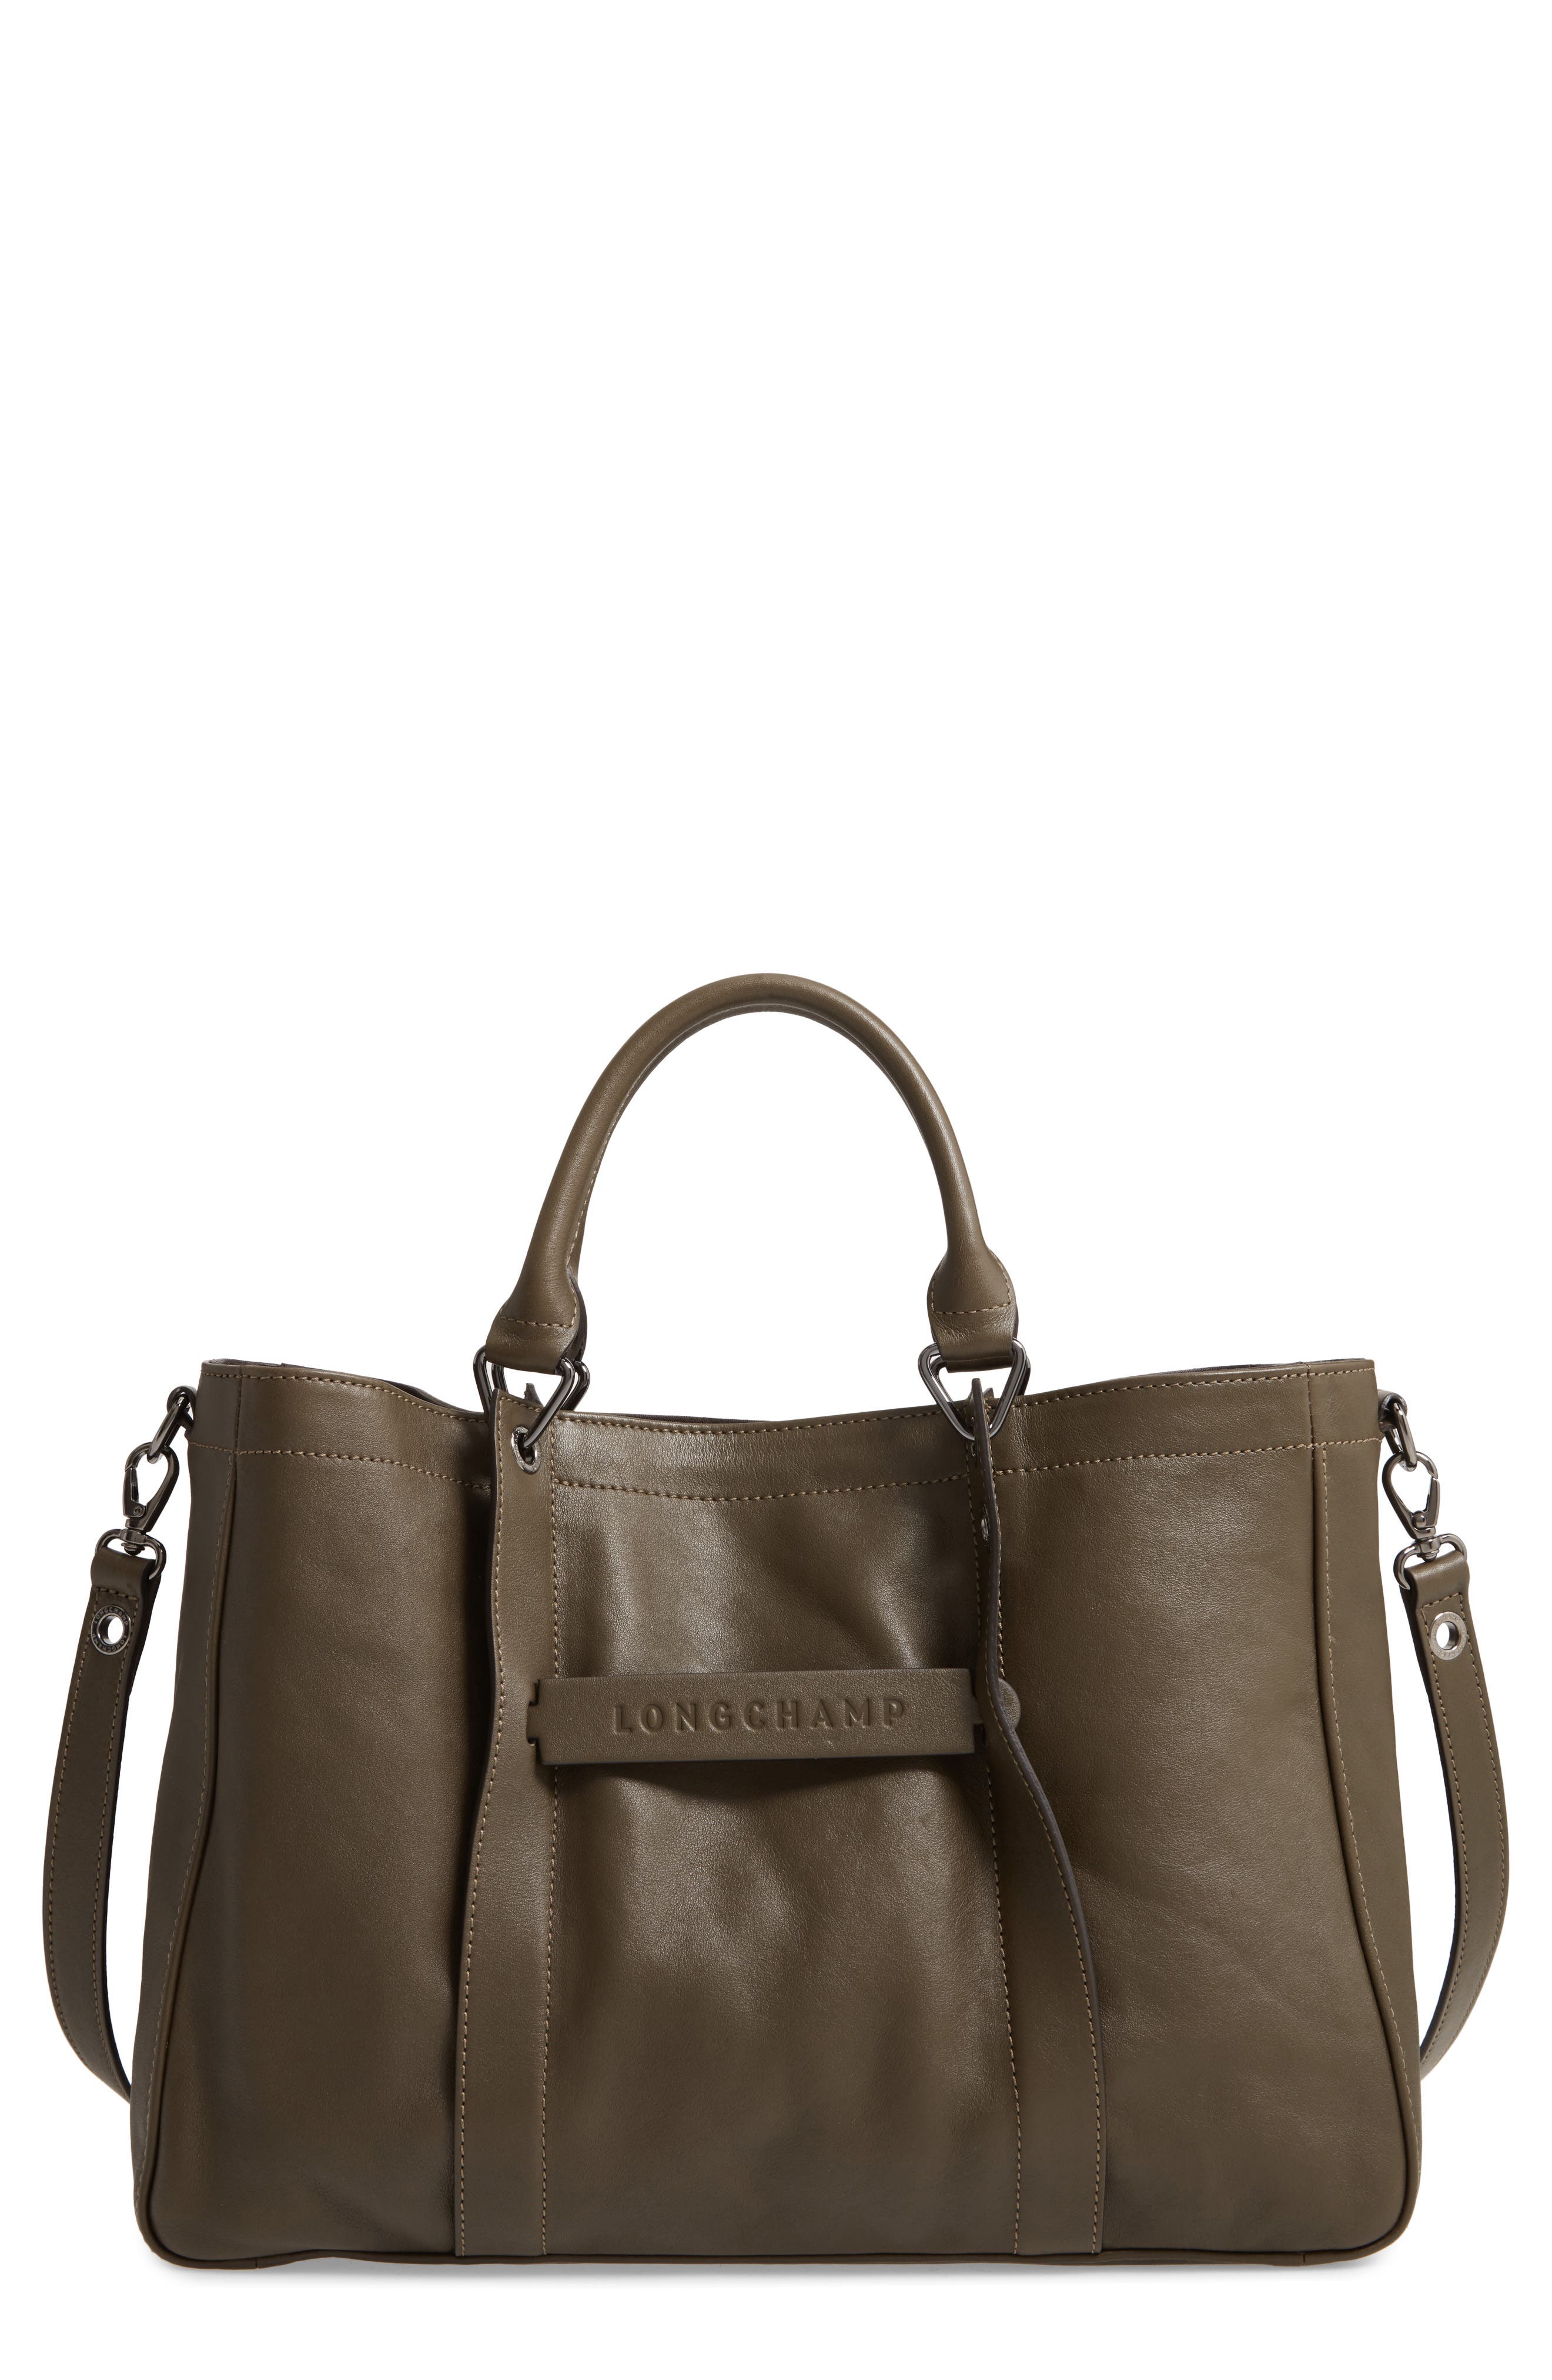 longchamp 3d small leather tote